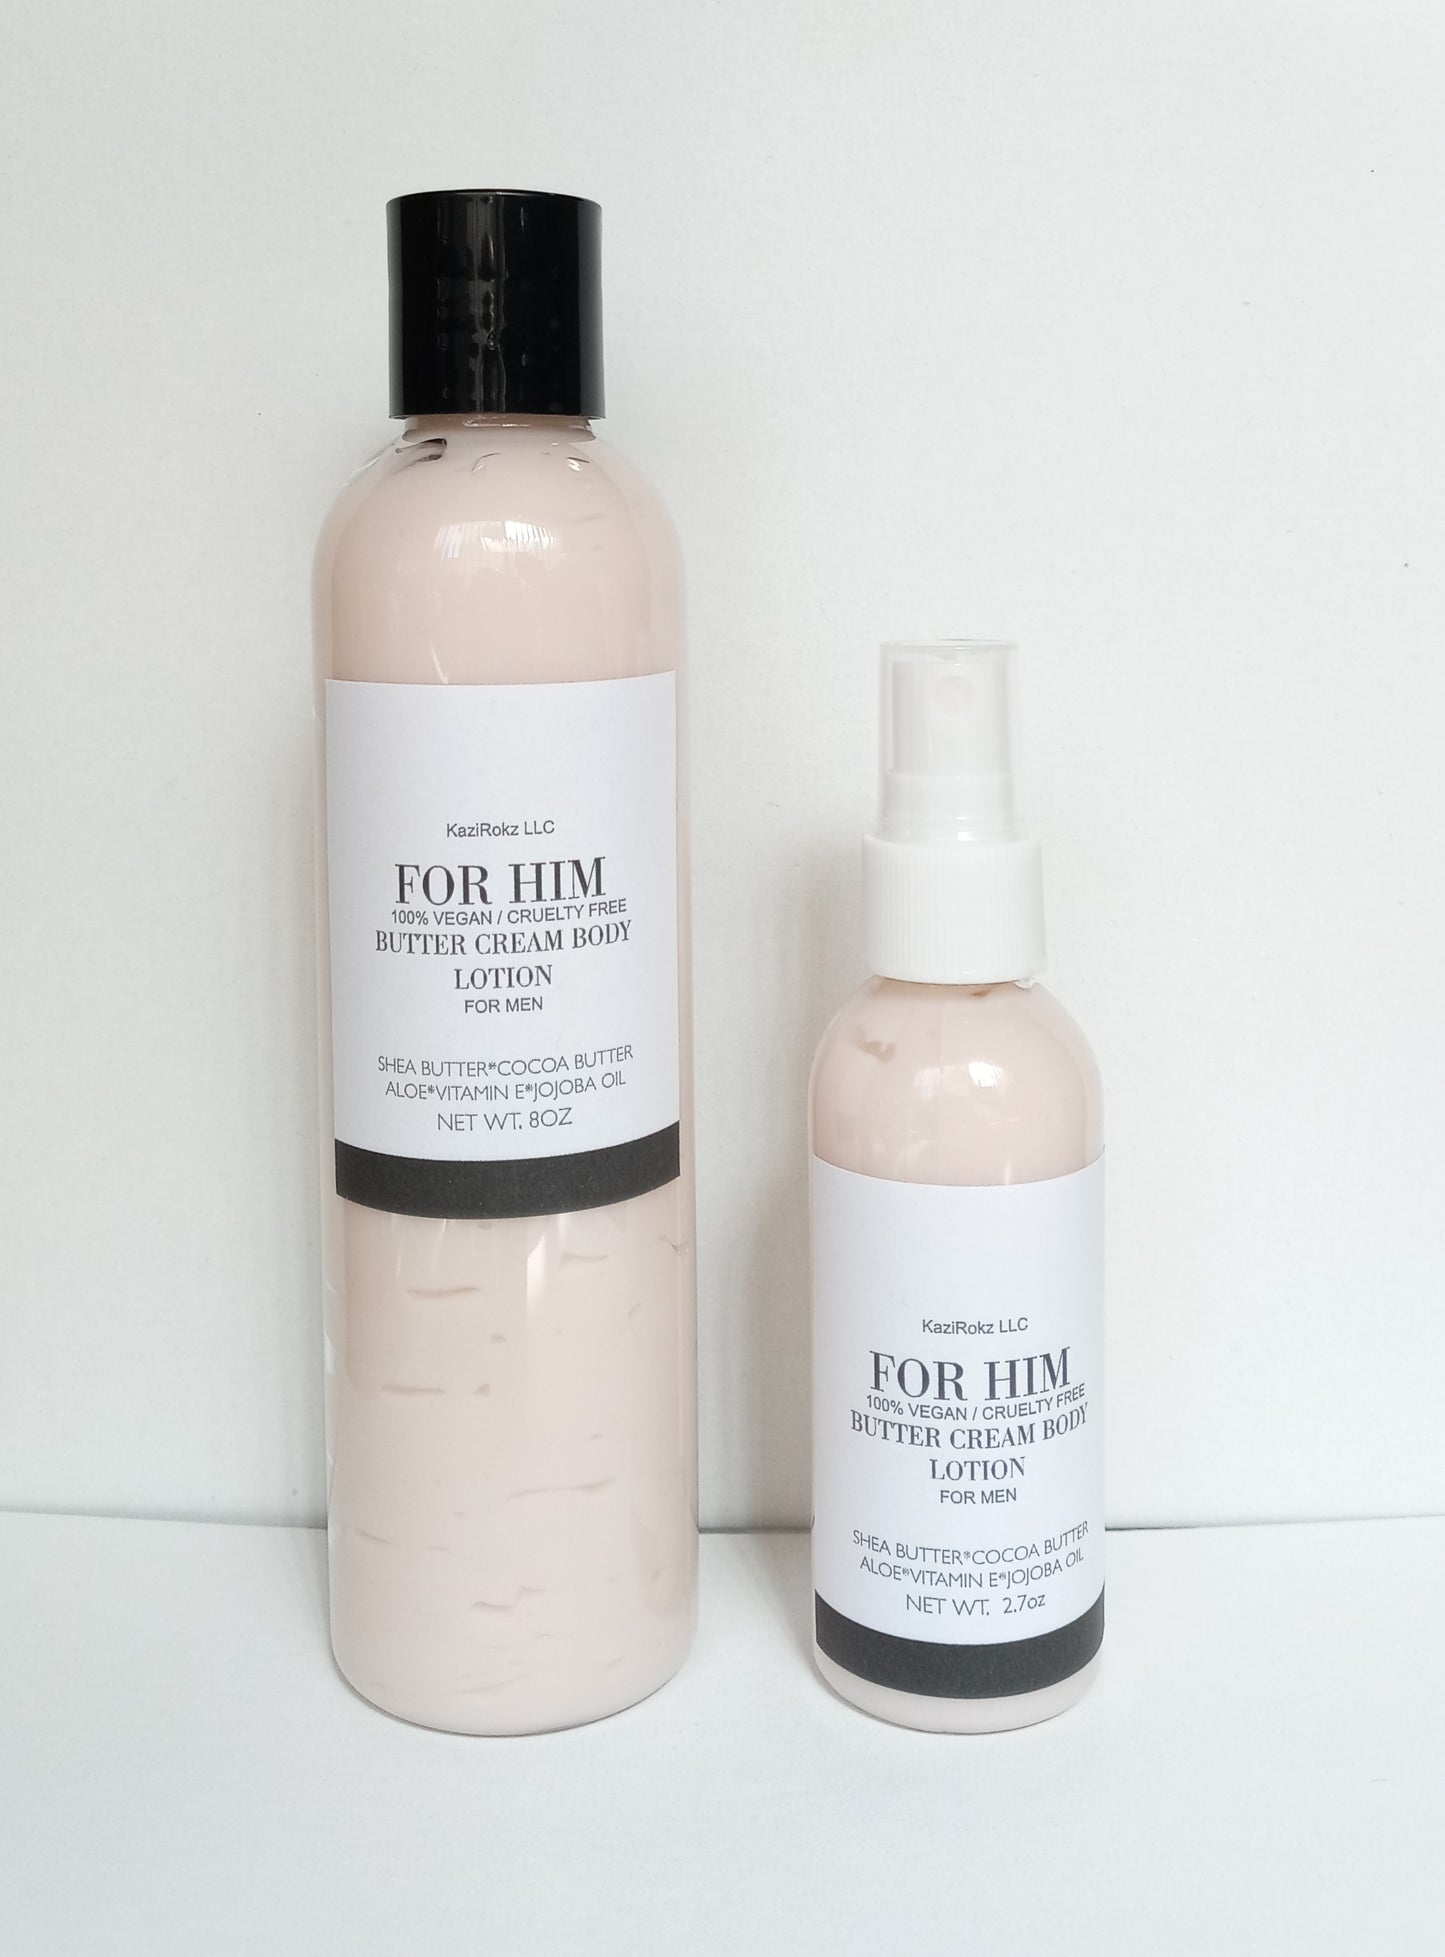 FOR HIM Body Lotion for Men (100% Vegan / Cruelty Free) 8oz, ULTRA HYDRATER and skin conditioner